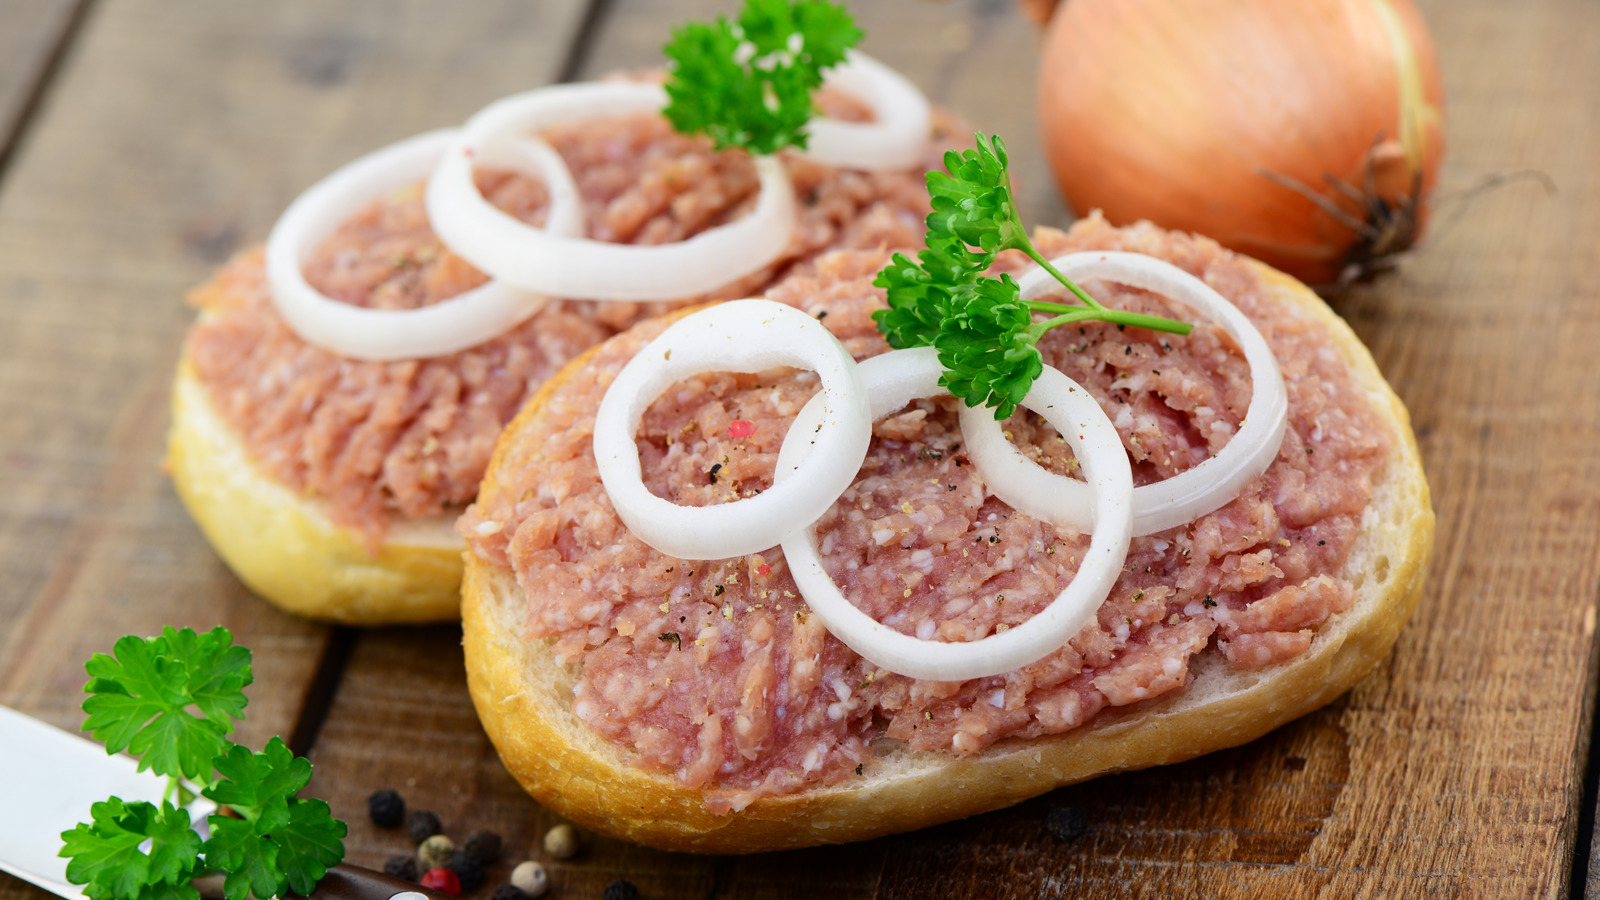 The Truth About Hackepeter, Germany's Traditional Raw Pork Dish